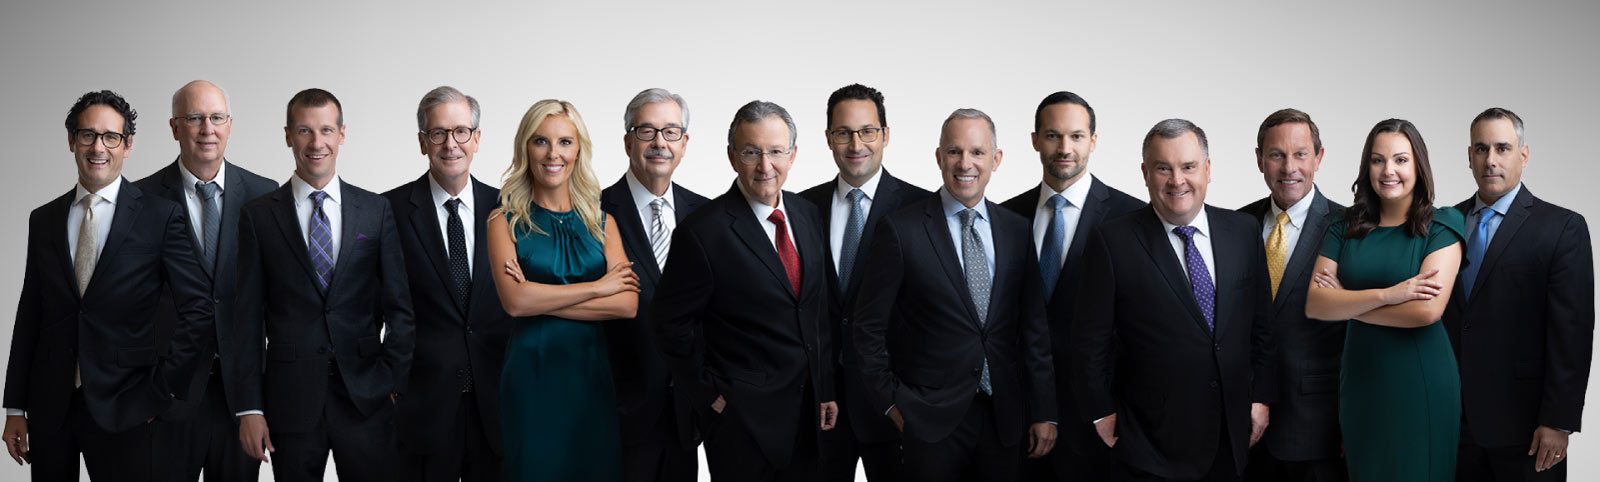 Sinas Dramis Law Firm Attorneys standing together in a row